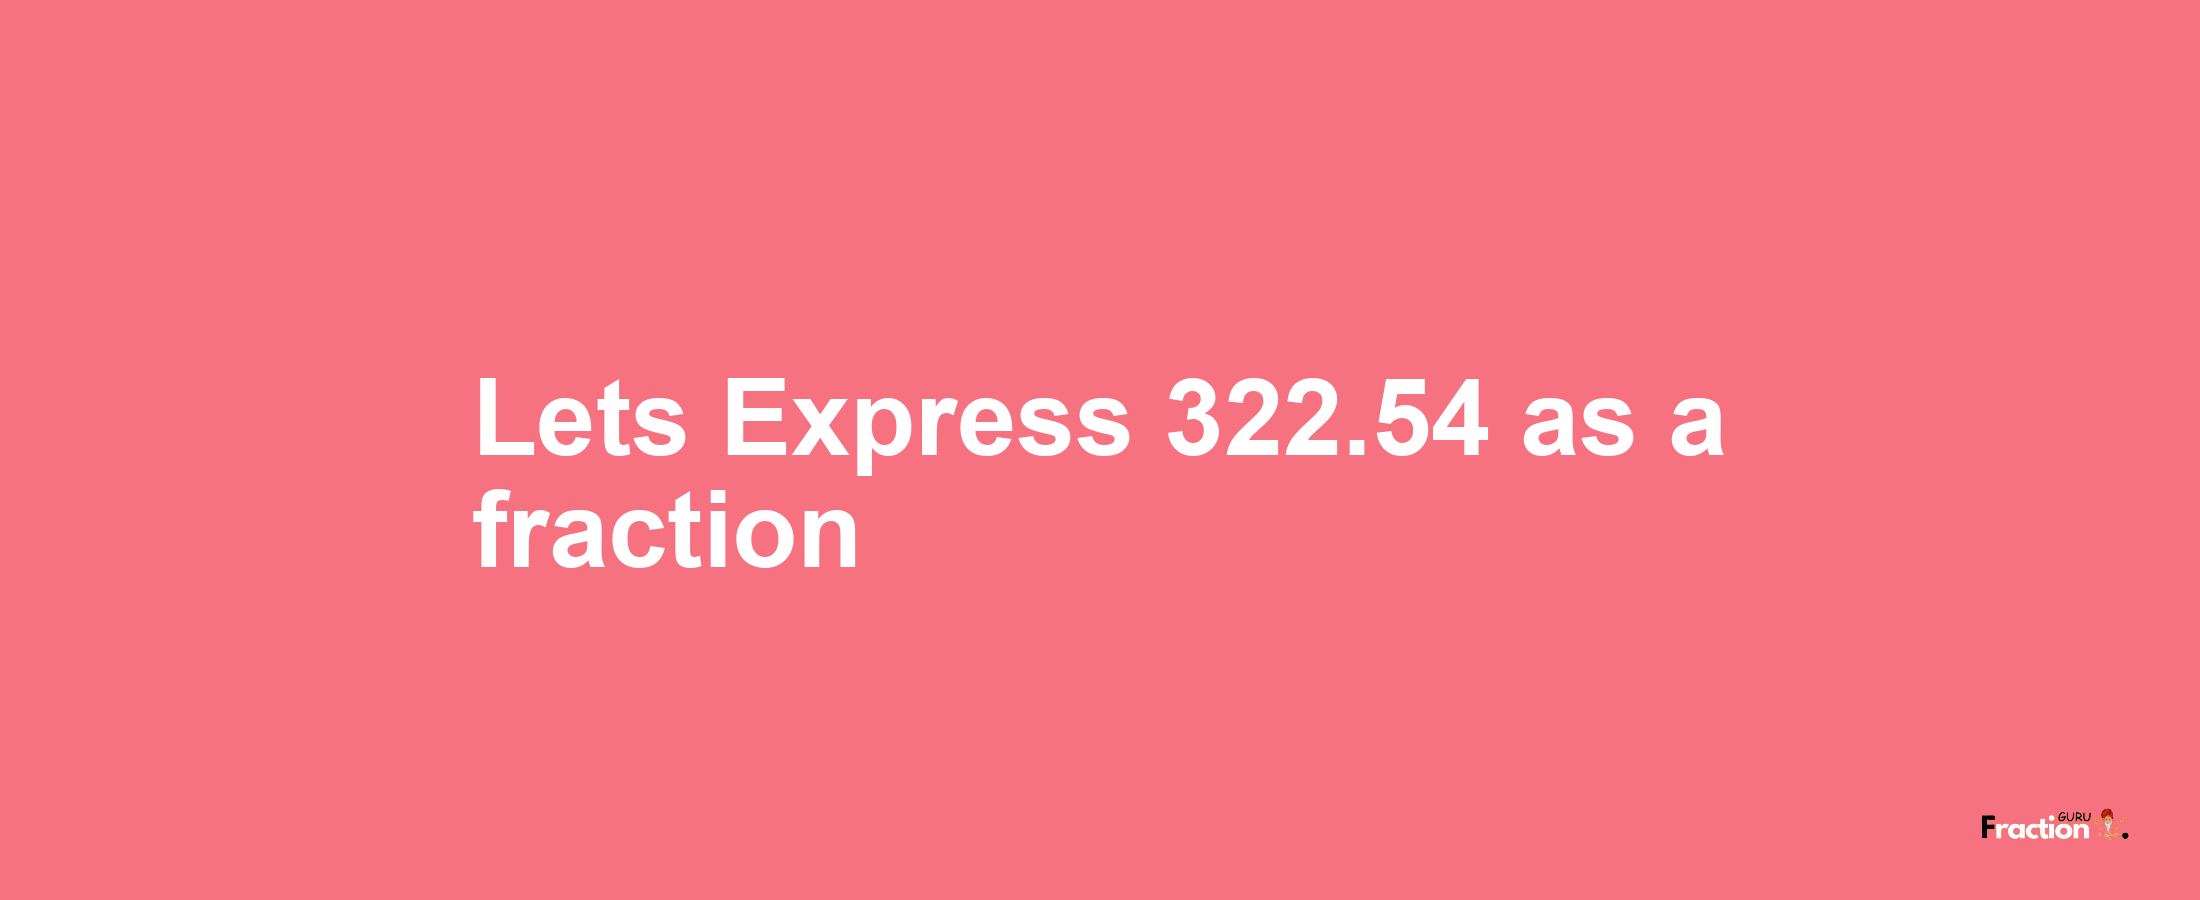 Lets Express 322.54 as afraction